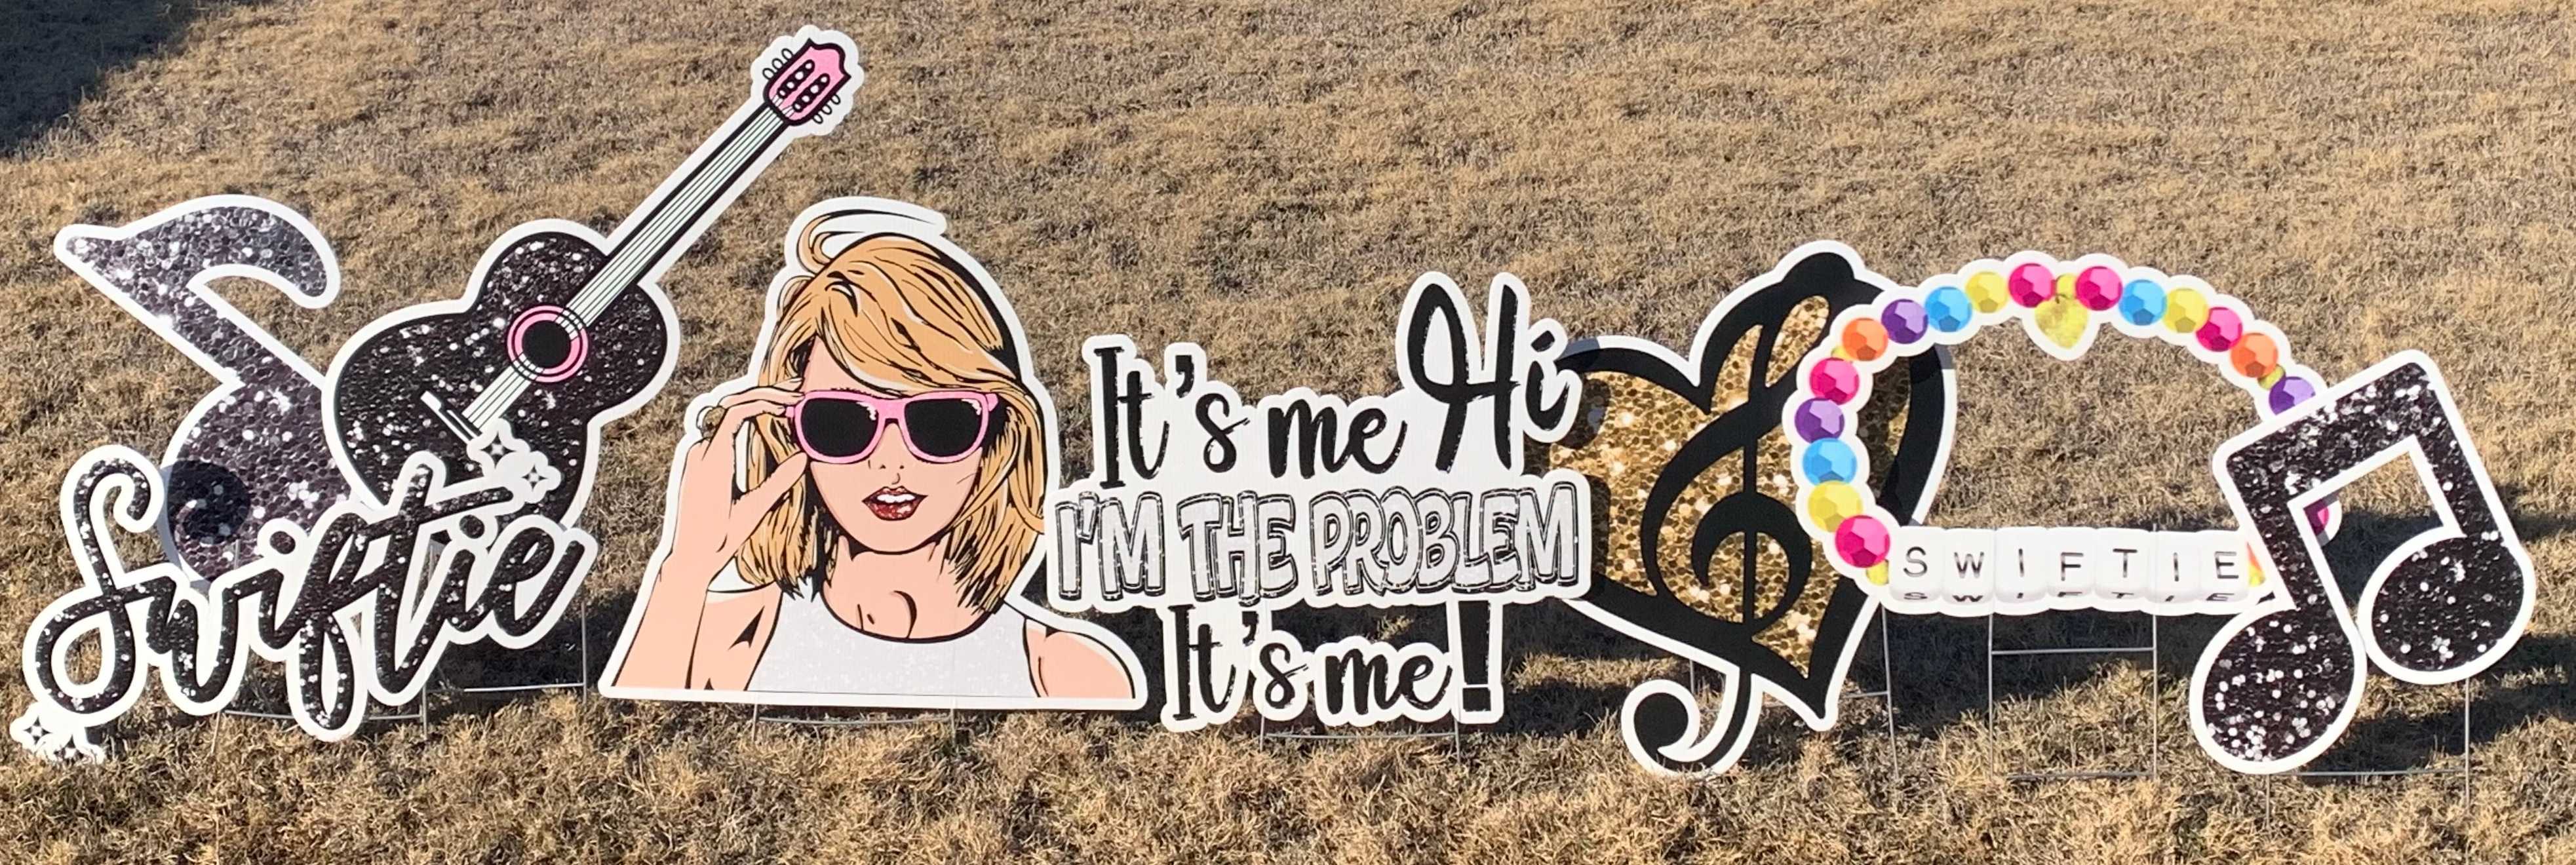 Yard card sign collection swiftie 